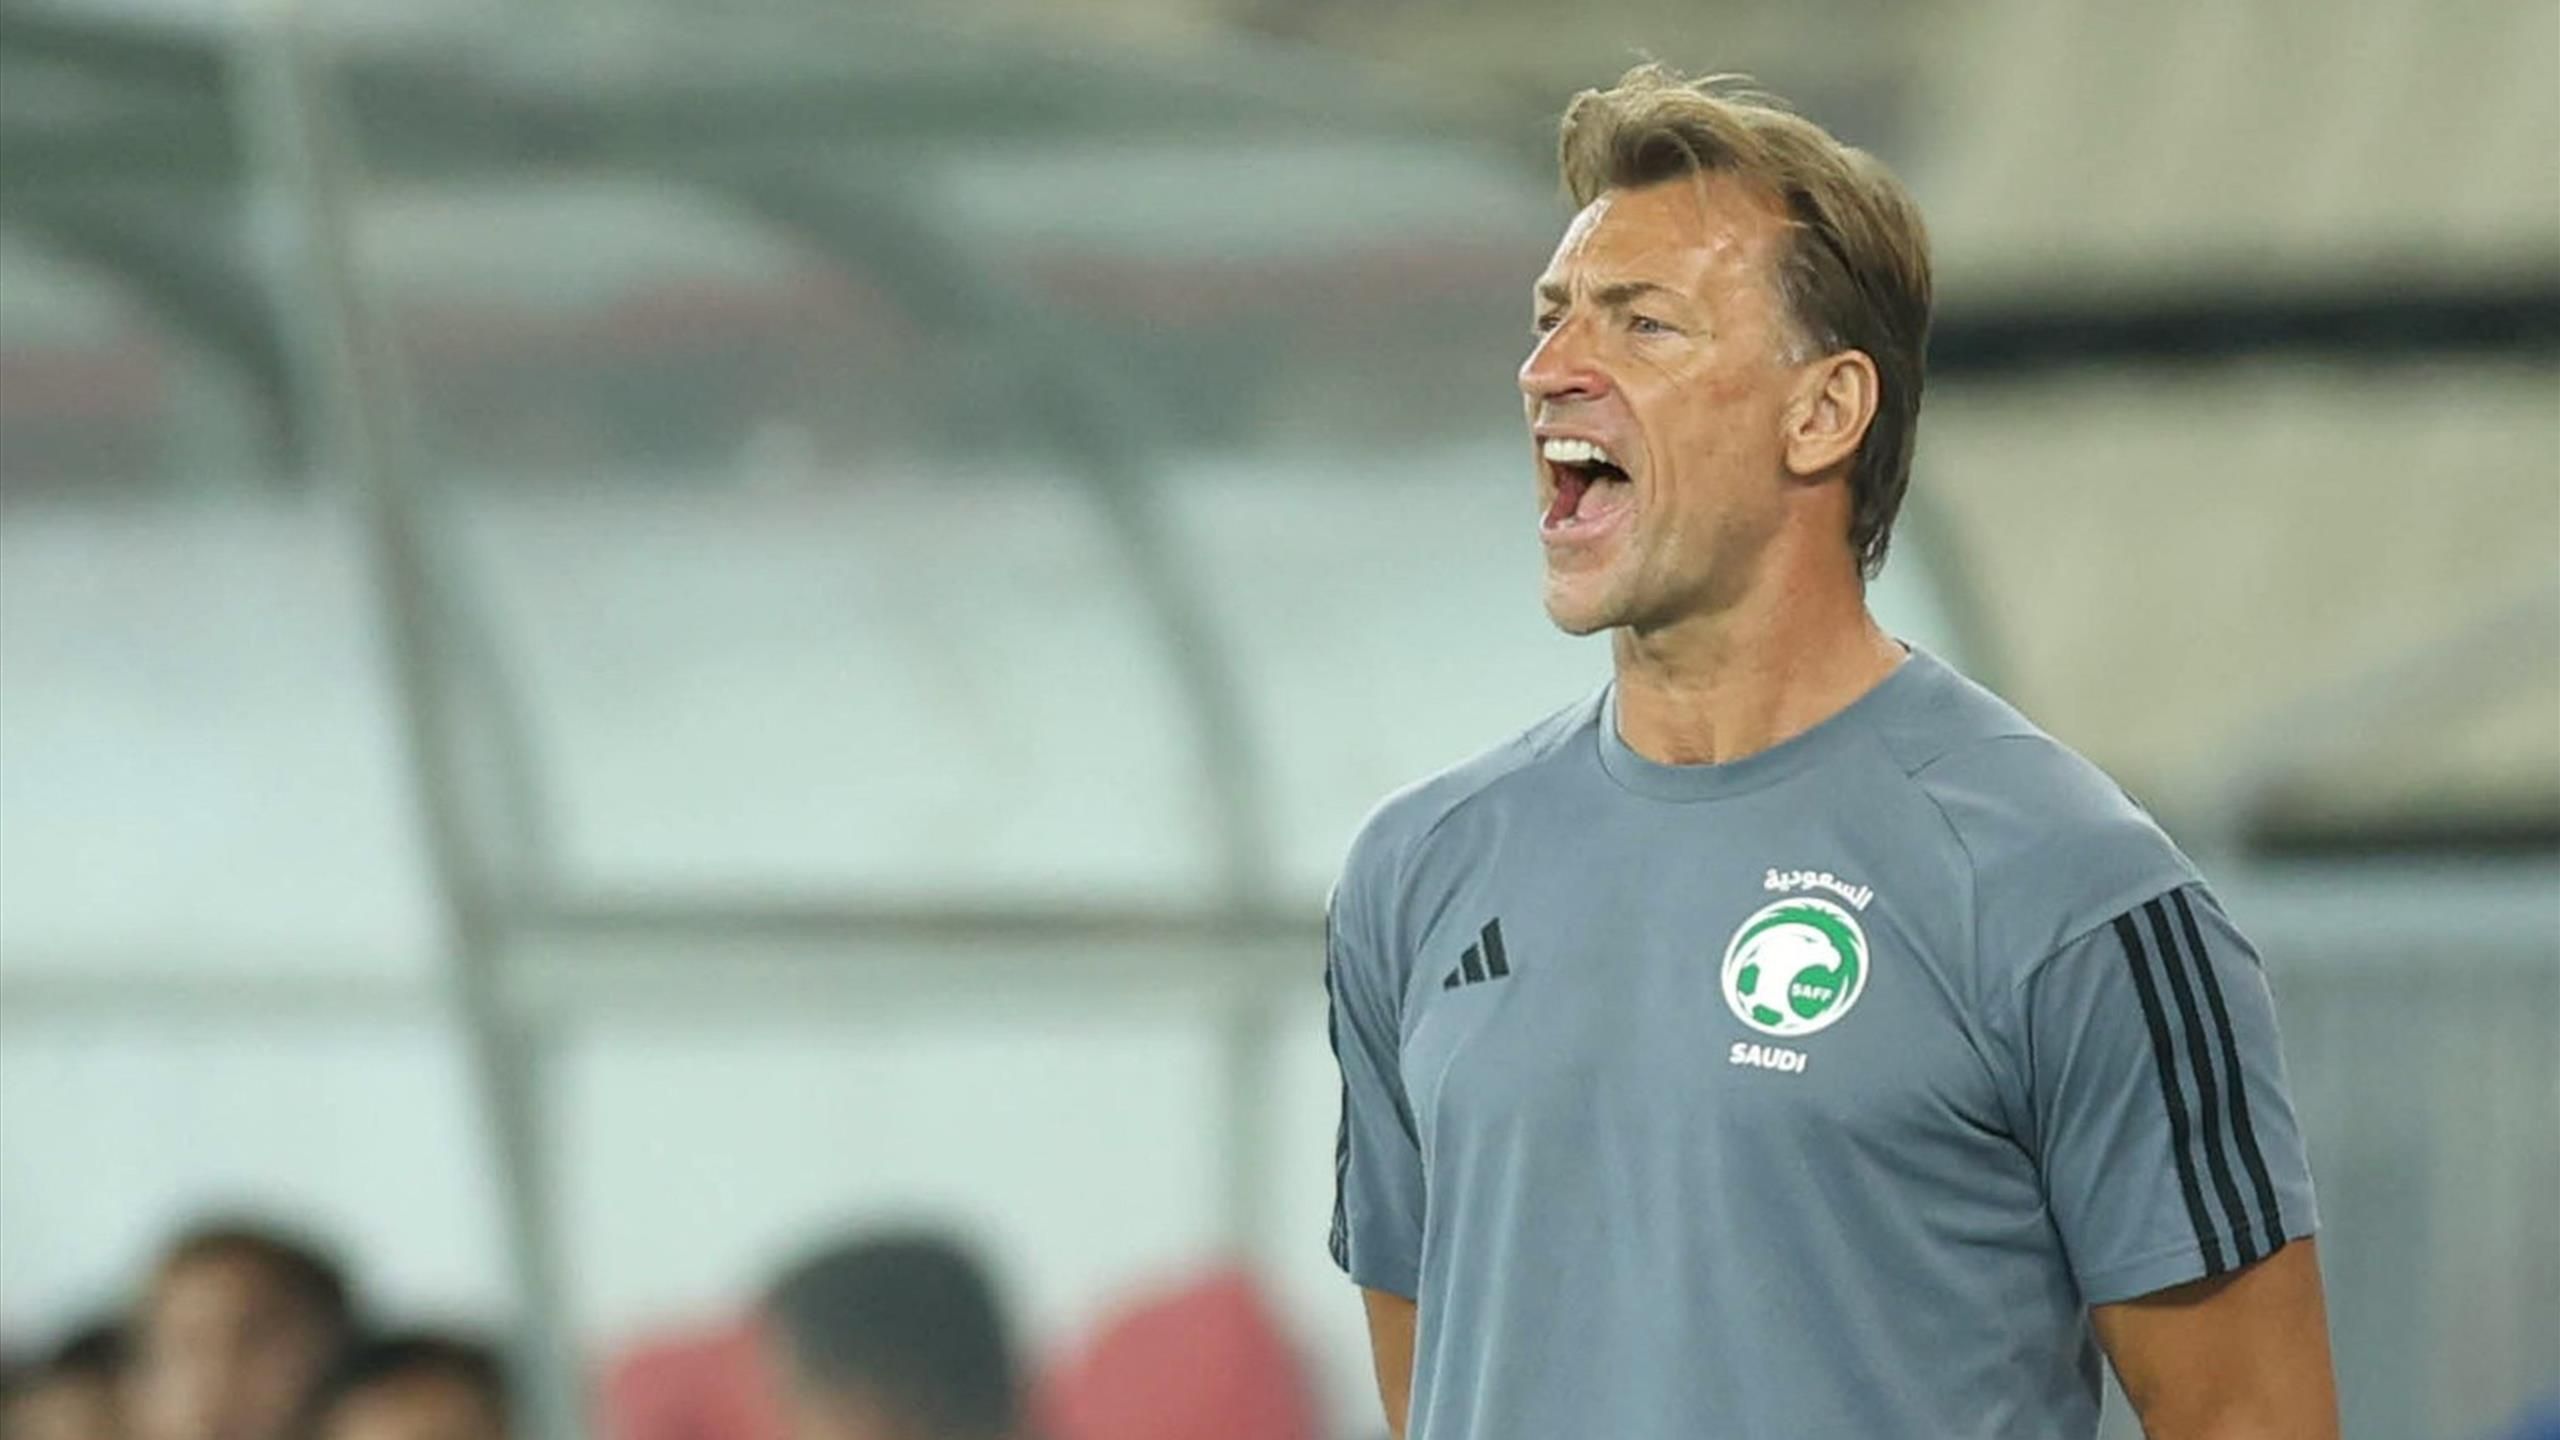 Herve Renard looks to solve World Cup selection issues as Saudi